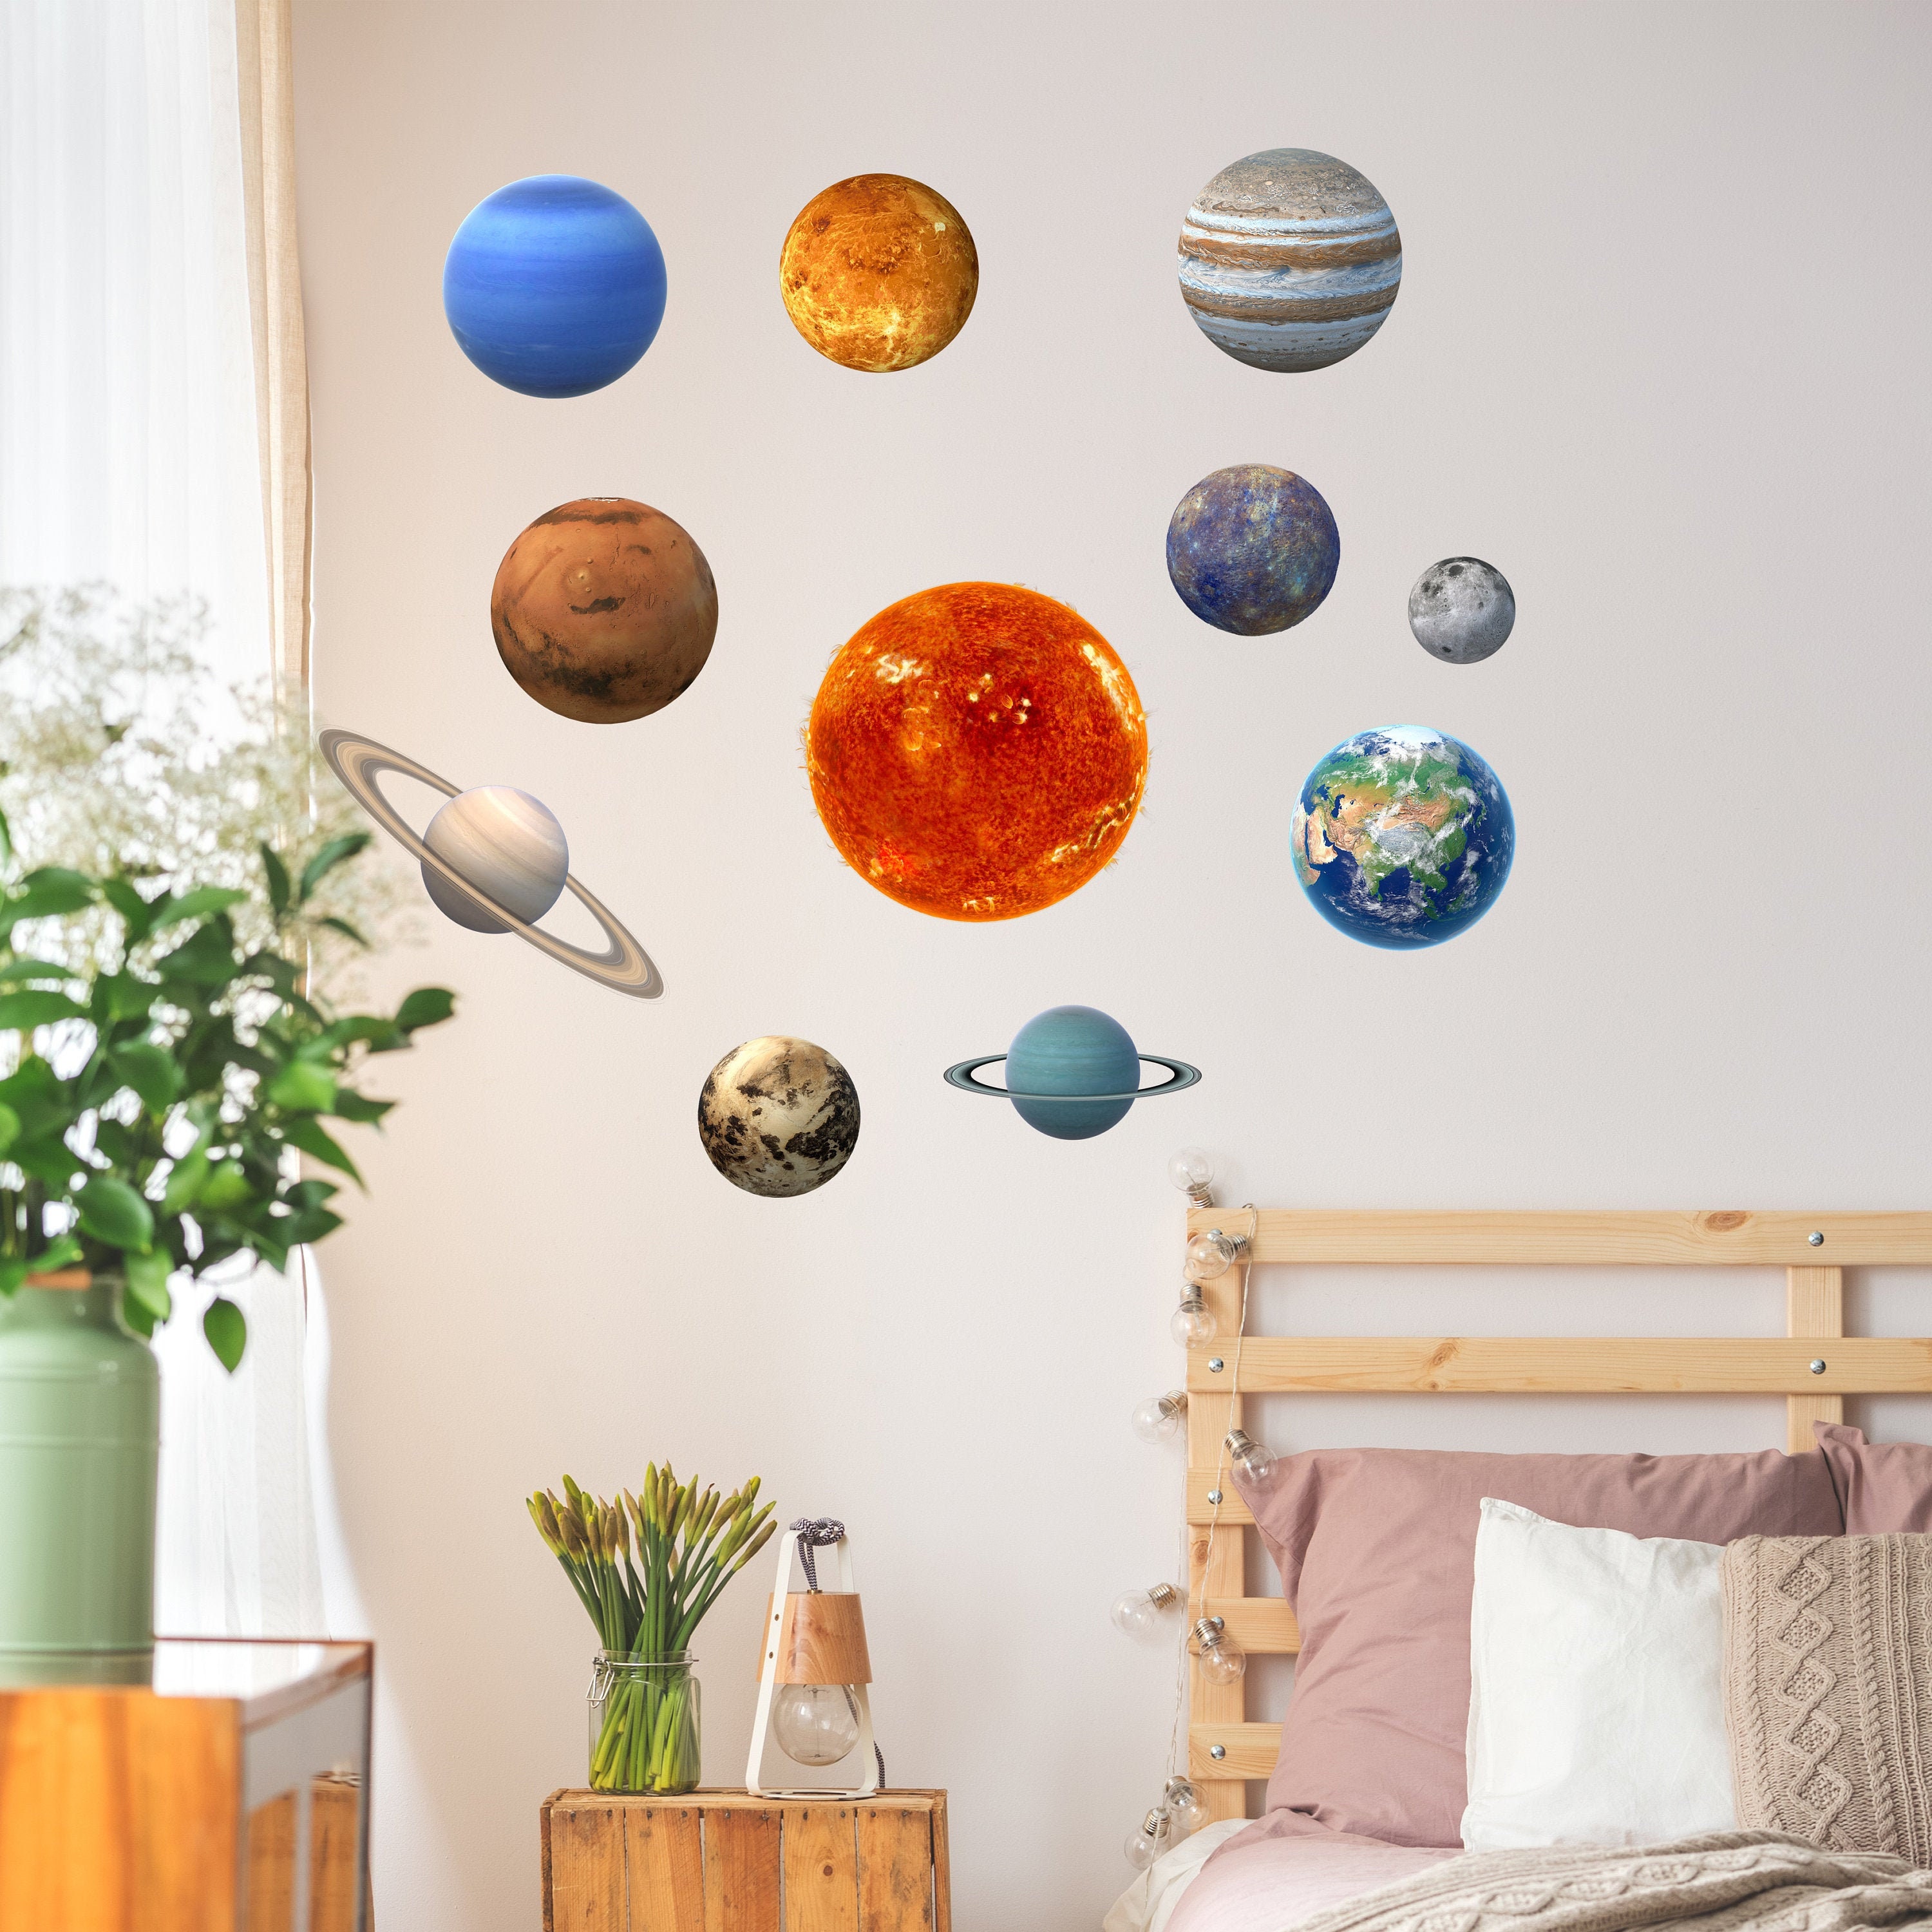 Glow in The Dark Stars for Ceiling or Wall Stickers - Glowing Wall Decals  Stickers Room Decor Kit - Galaxy Glow Star Set and Solar System Decal for